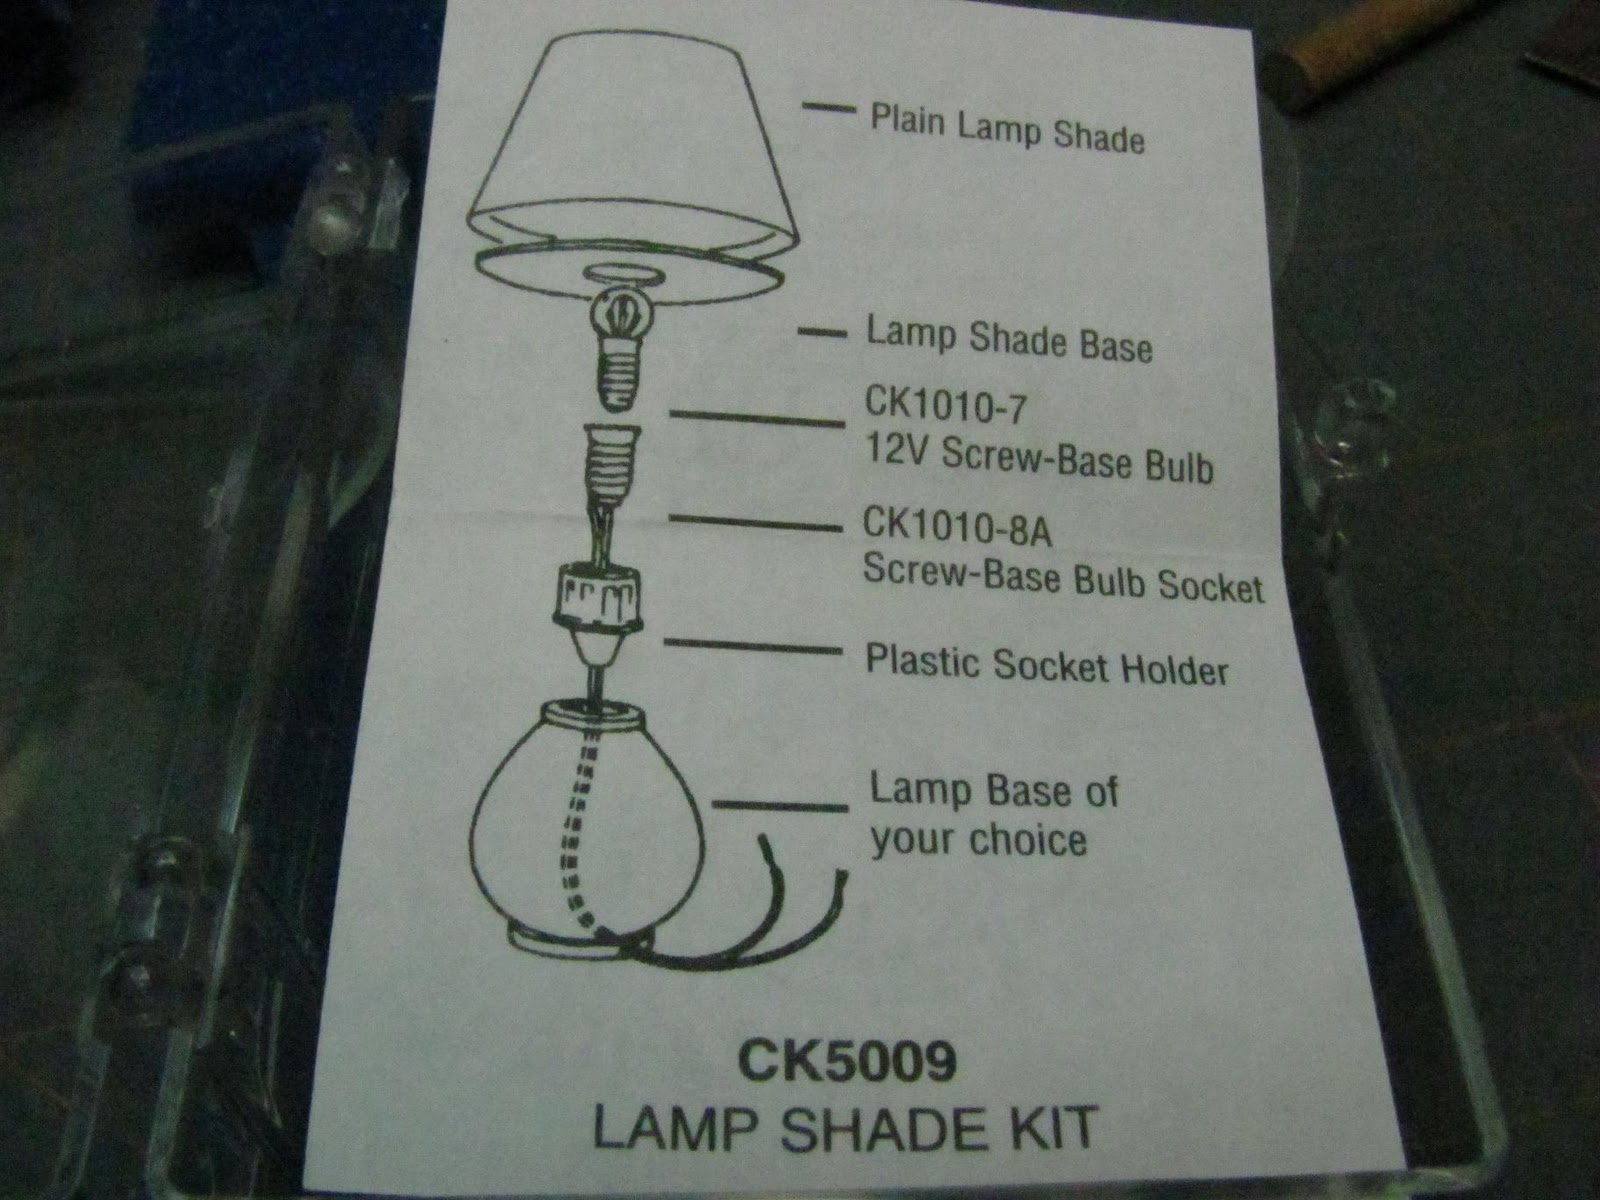 How do you build a lamp with a lamp making kit?